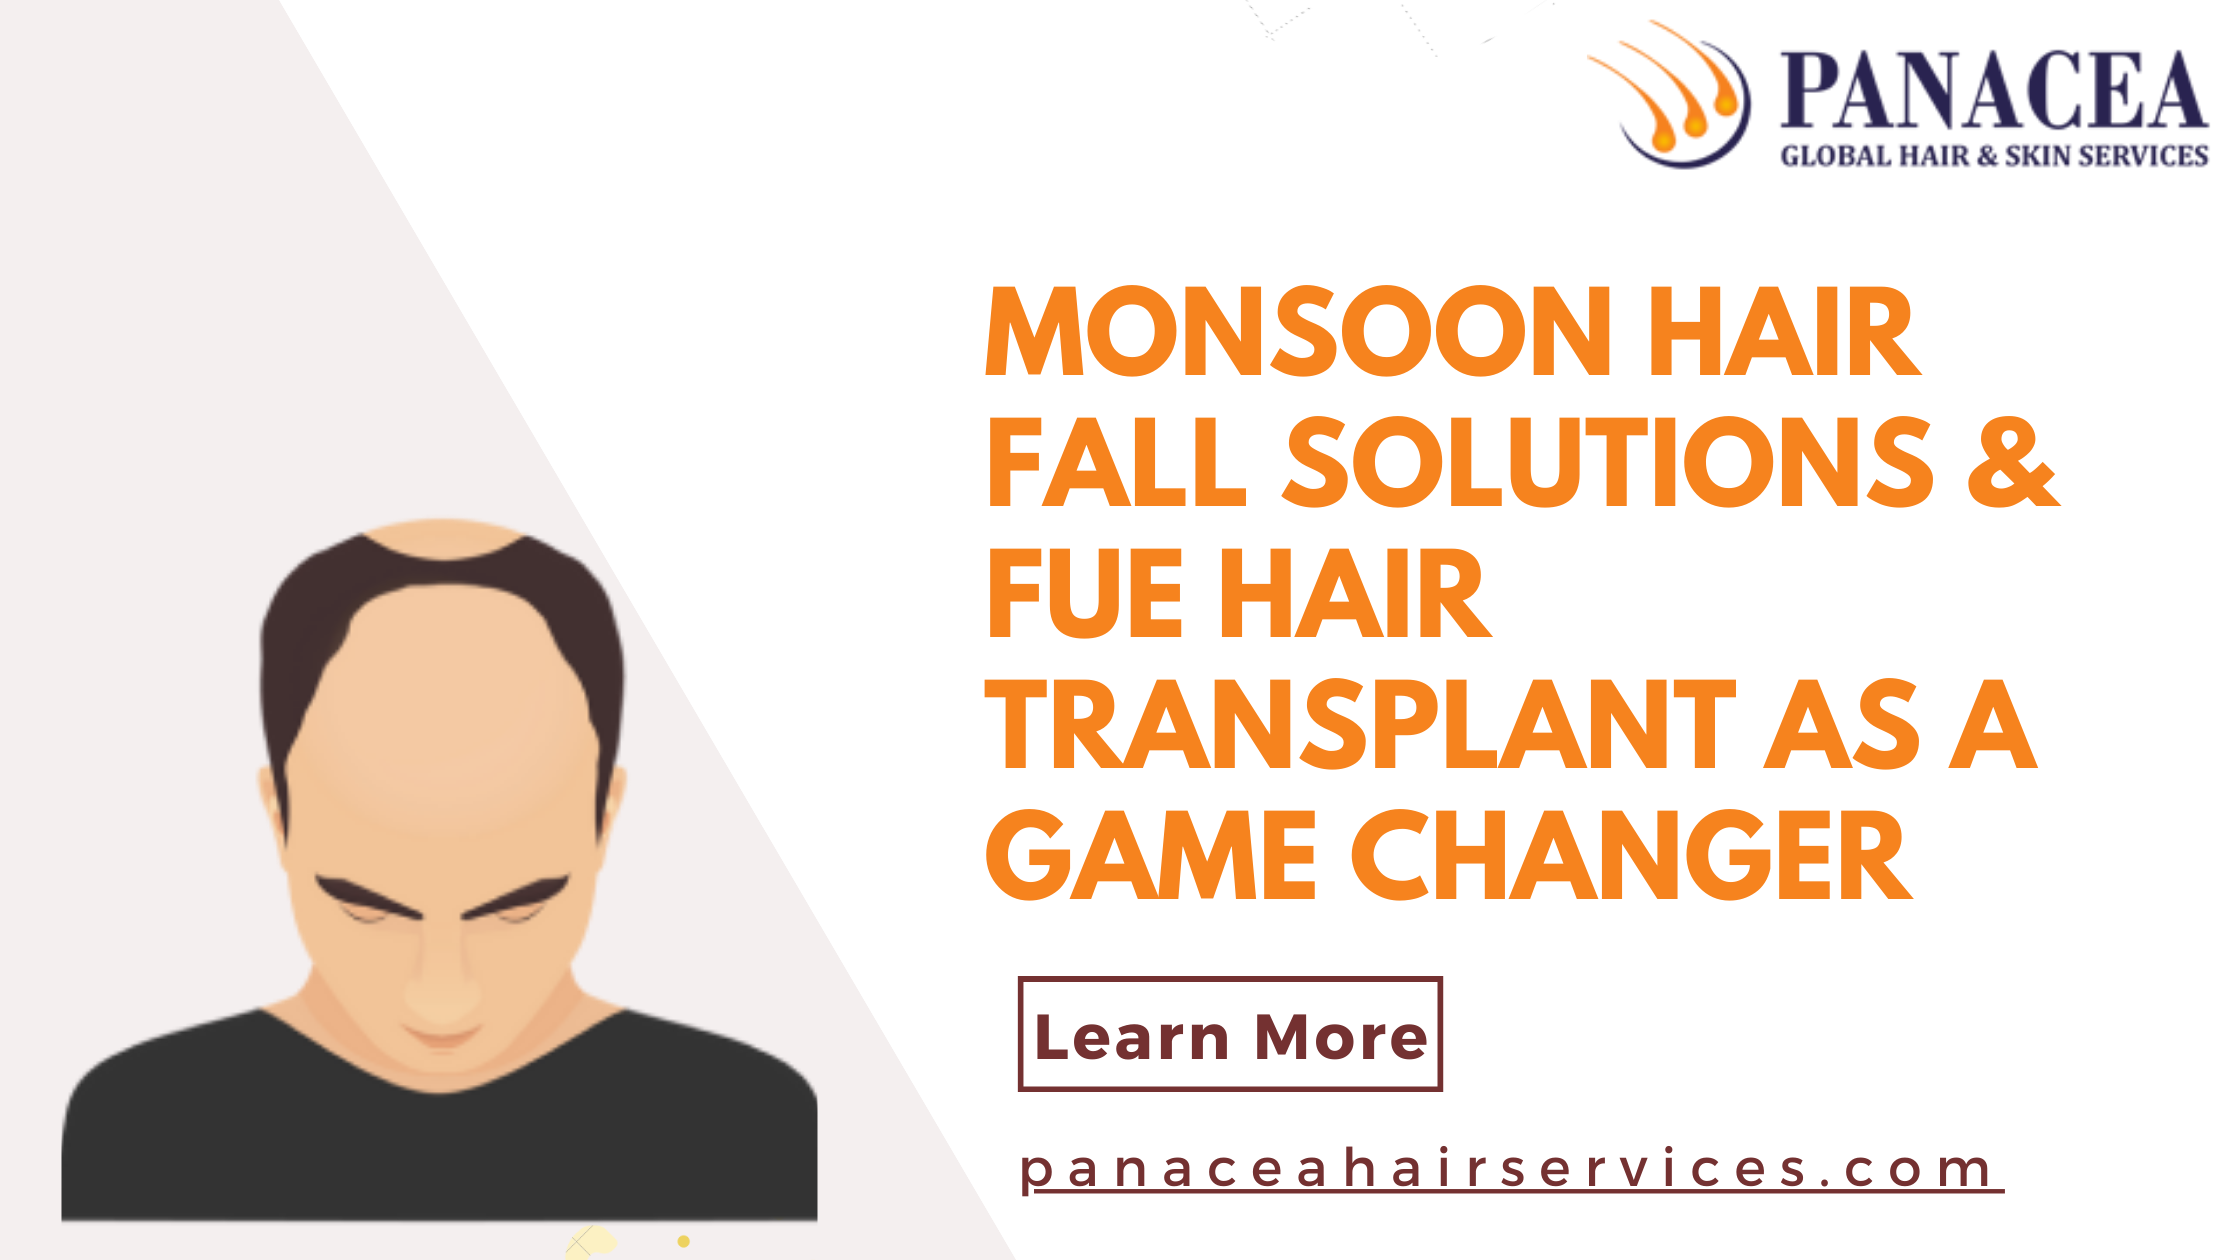 Monsoon Hair Fall Solutions or FUE Hair Transplant as a Game Changer